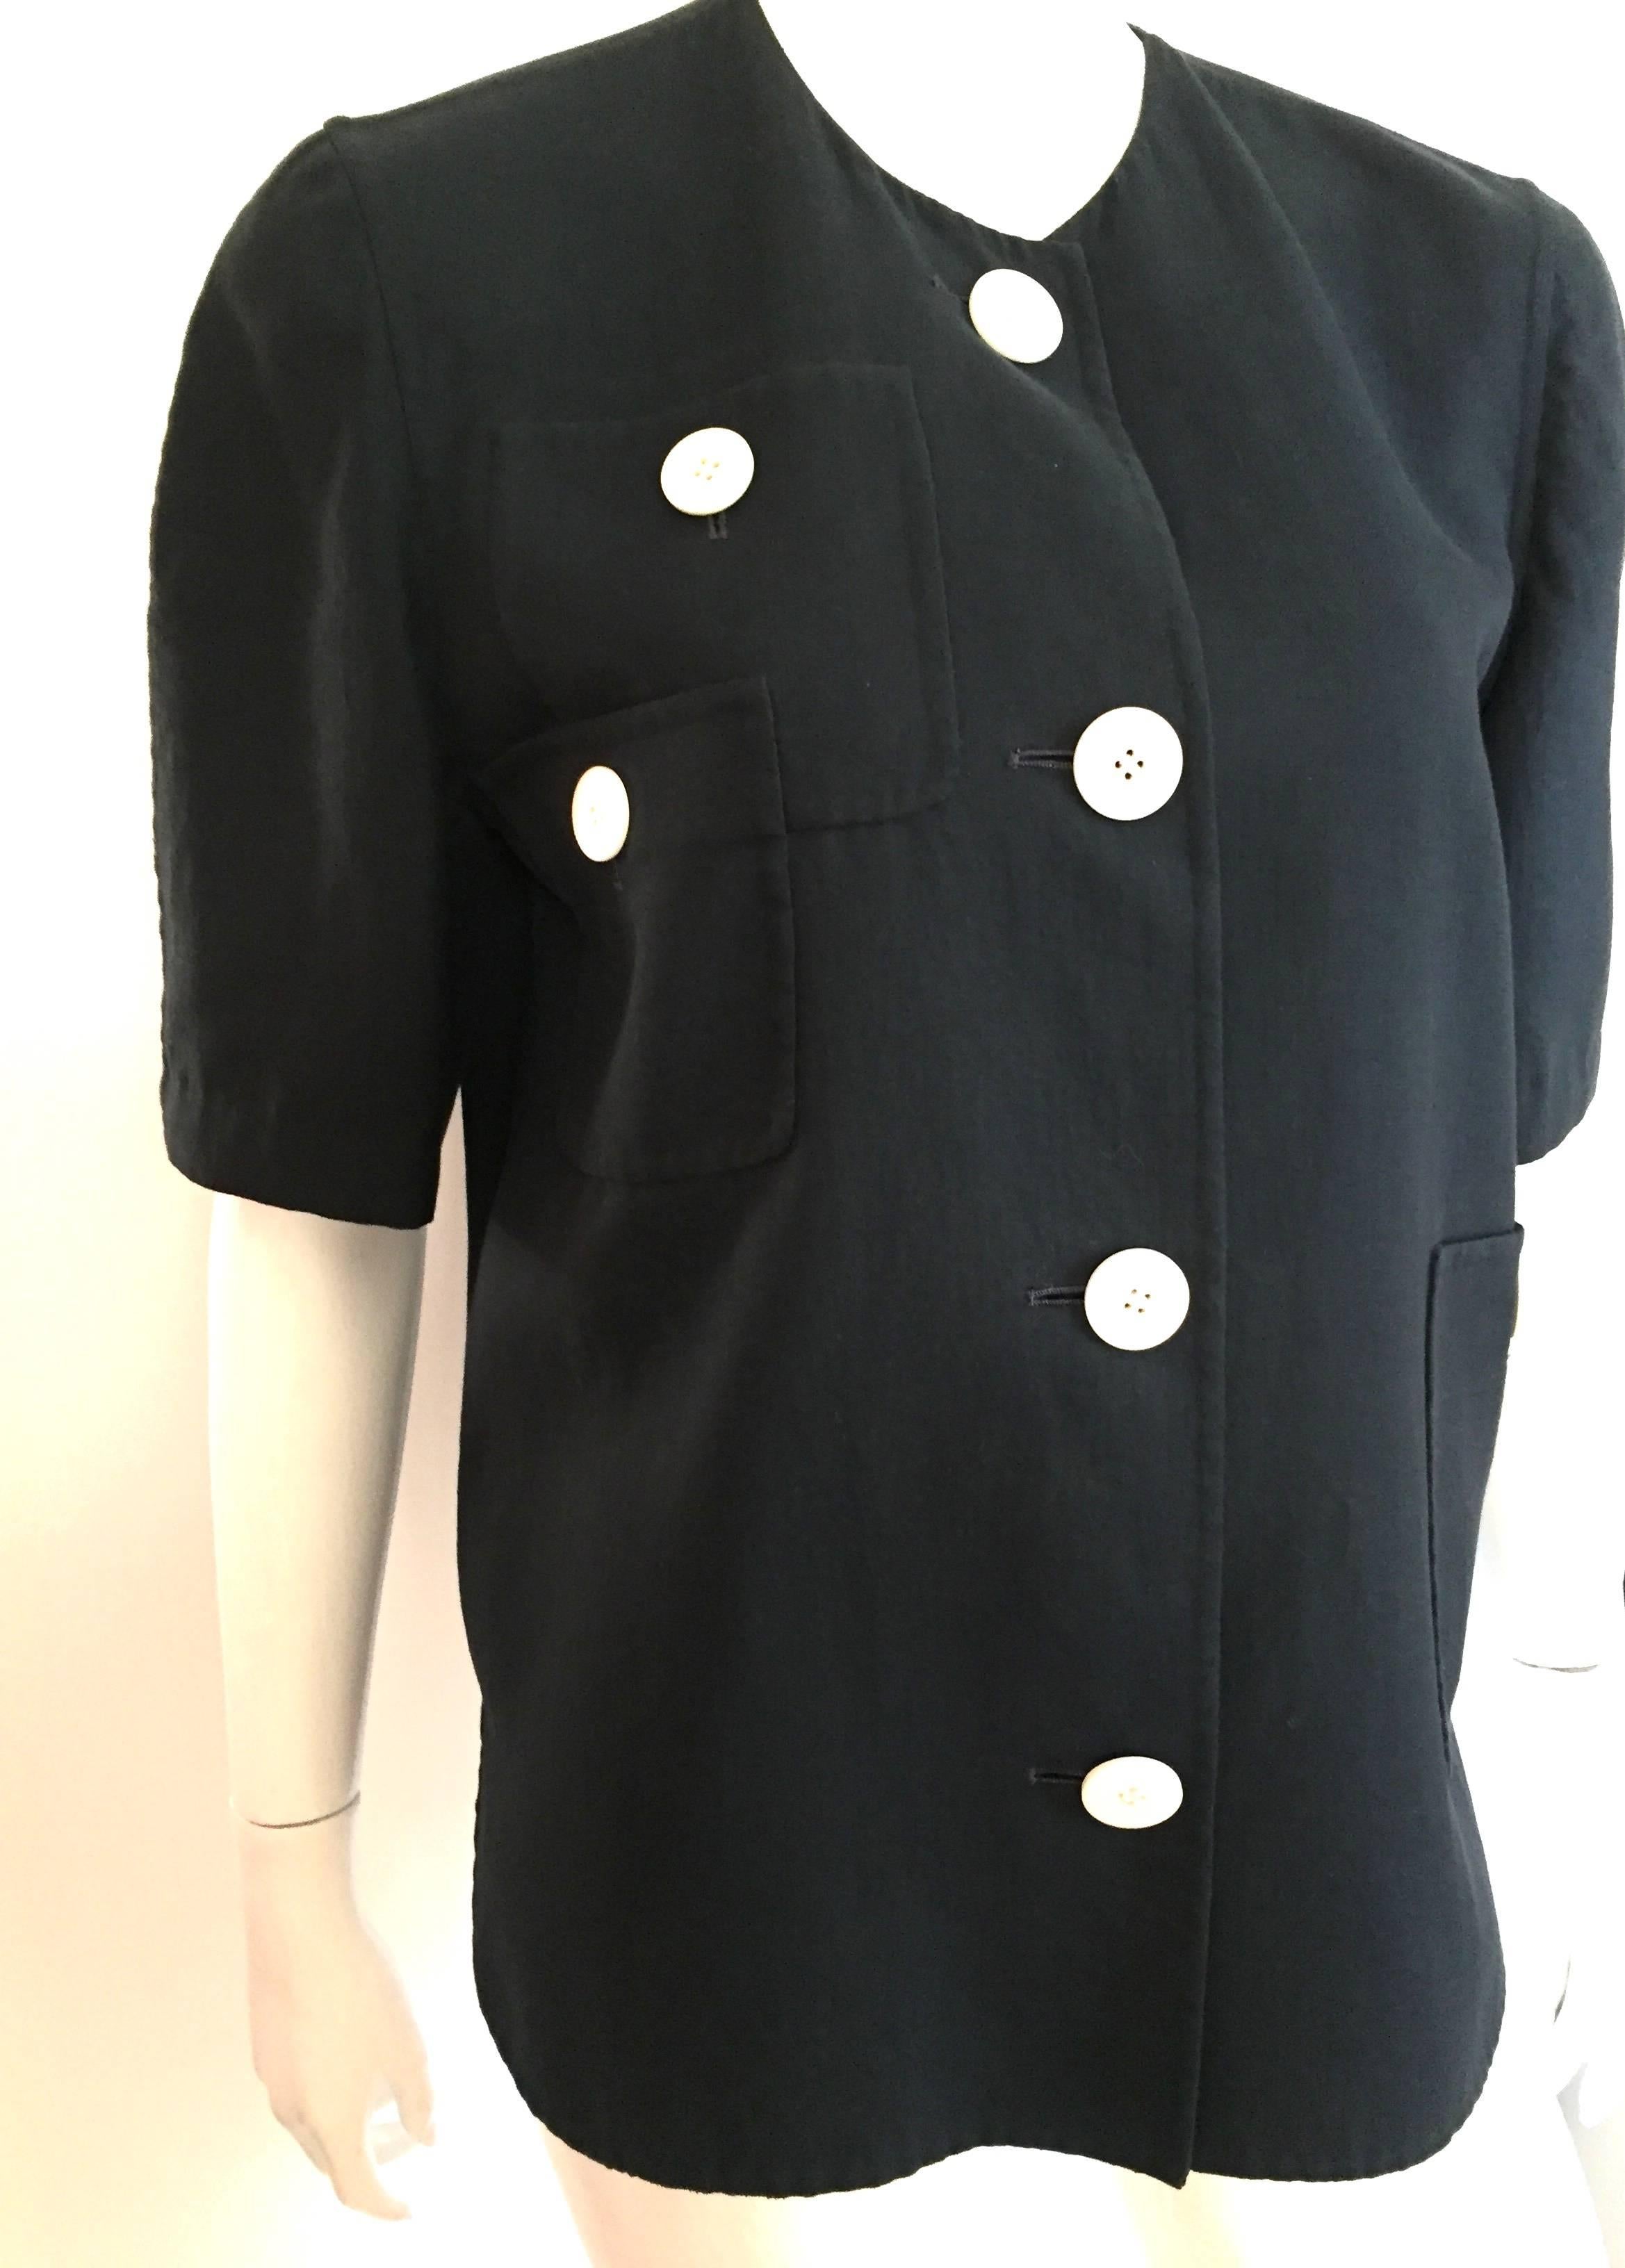 Bill Blass 1980s navy cotton whimsical design short sleeve top with big white round buttons is a vintage size 10.  Ladies please use your tape measure so you can properly measure your bust to make certain this is how Bill Blass wanted it to look on